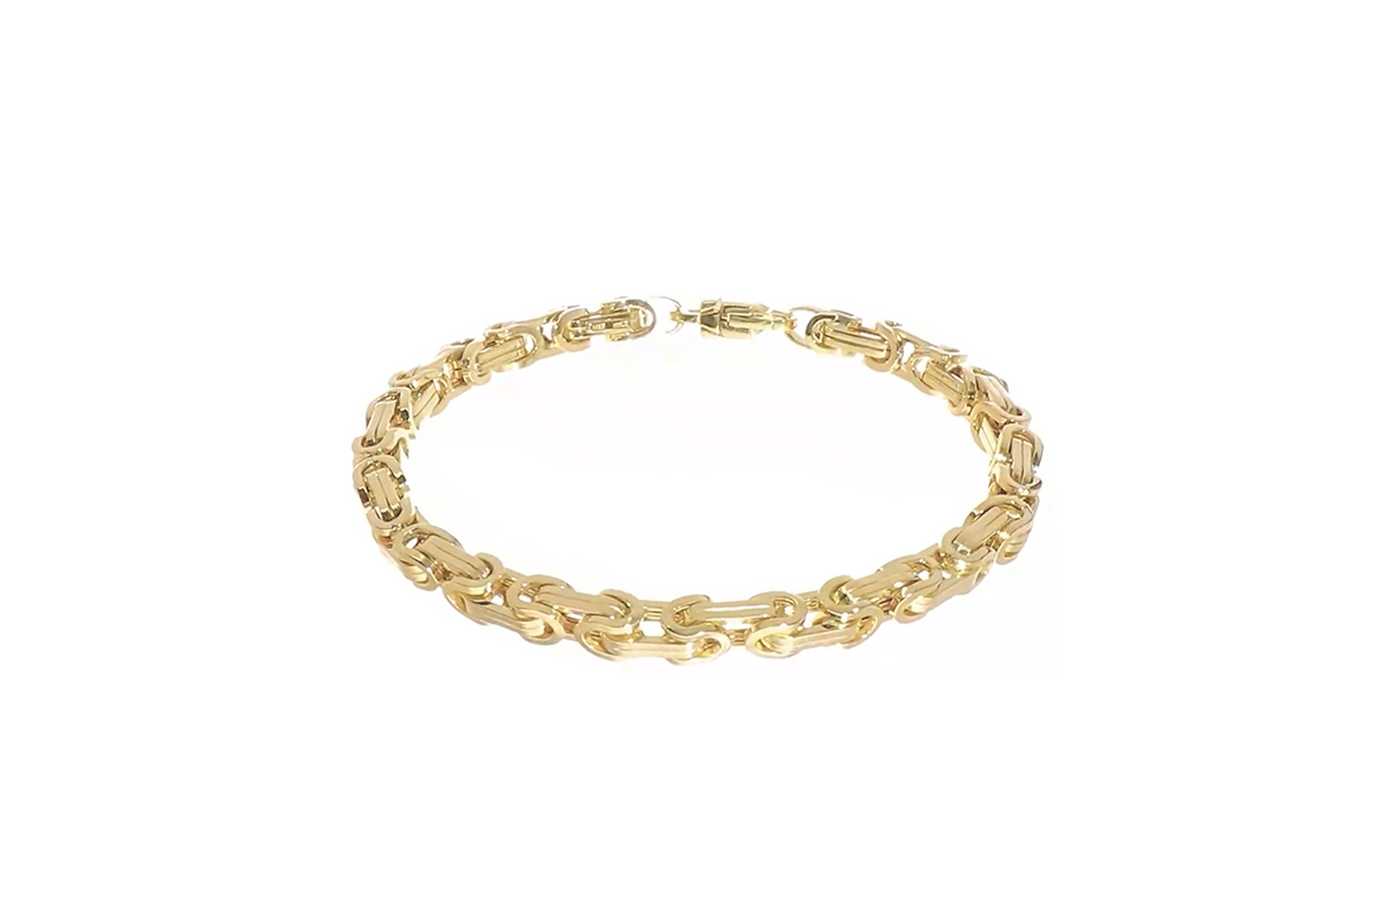 Entwined Link Bracelet in Yellow Gold